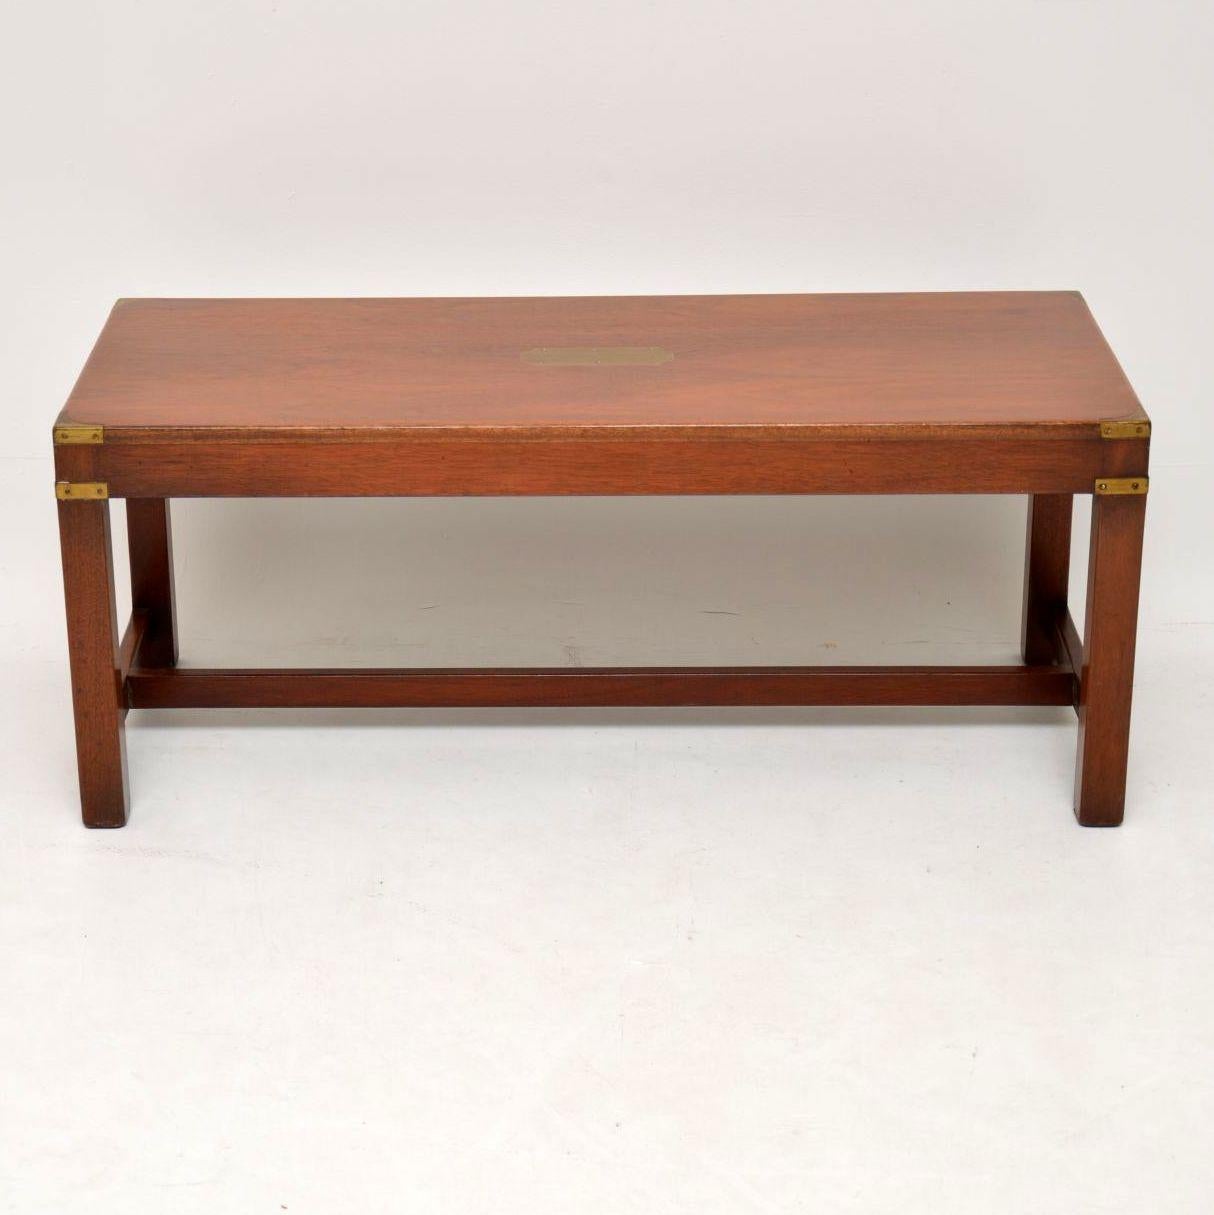 Antique Campaign style mahogany coffee table in excellent condition having just been French polished. It has a brass plaque on the top & military style corner fittings. This table is very well constructed with strong legs joined by cross stretchers